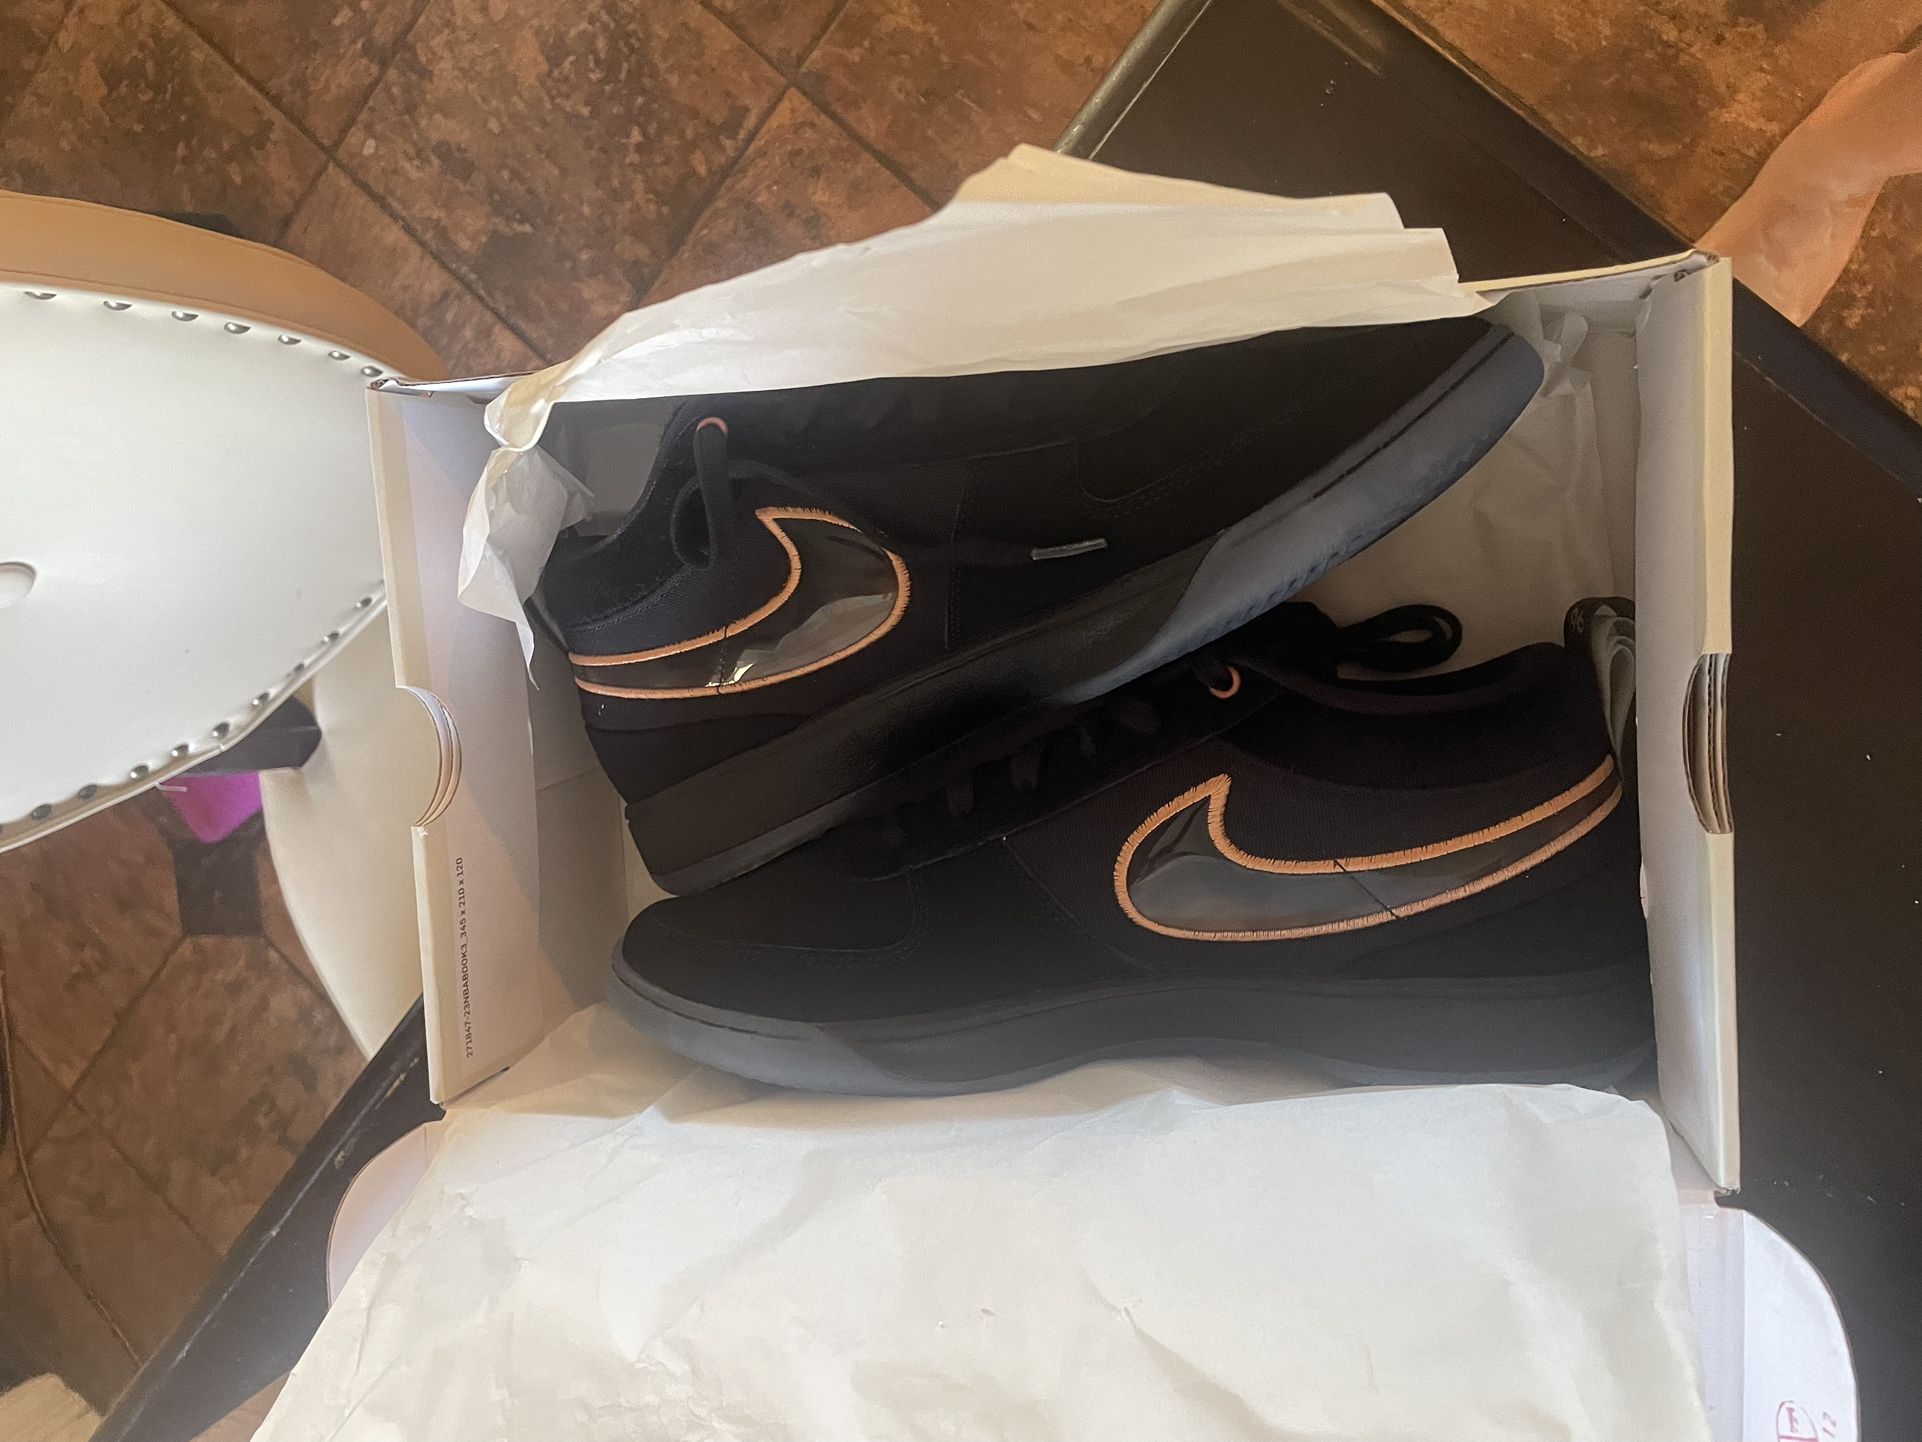 Booker Shoes Brand New 10.5